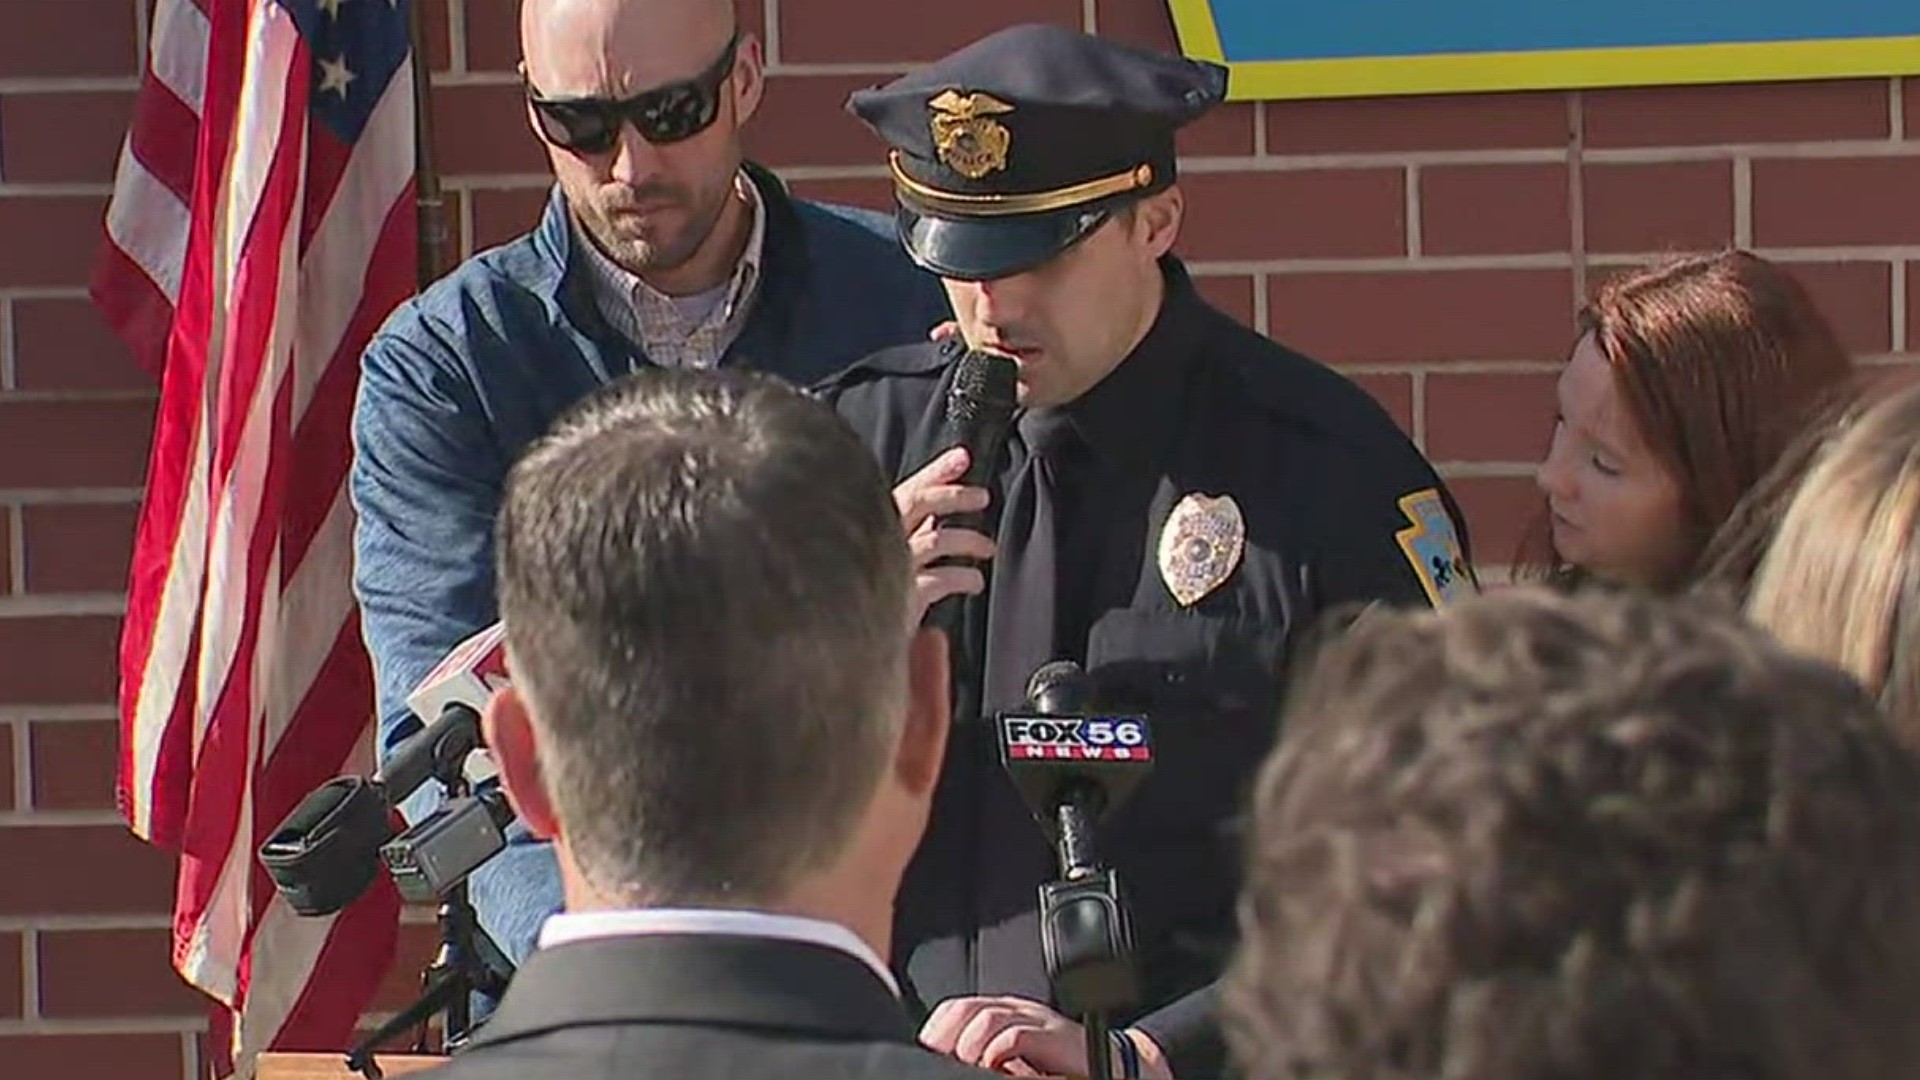 Detective Kyle Gilmartin speaks publicly for the first time since being severely wounded when he was shot while on duty